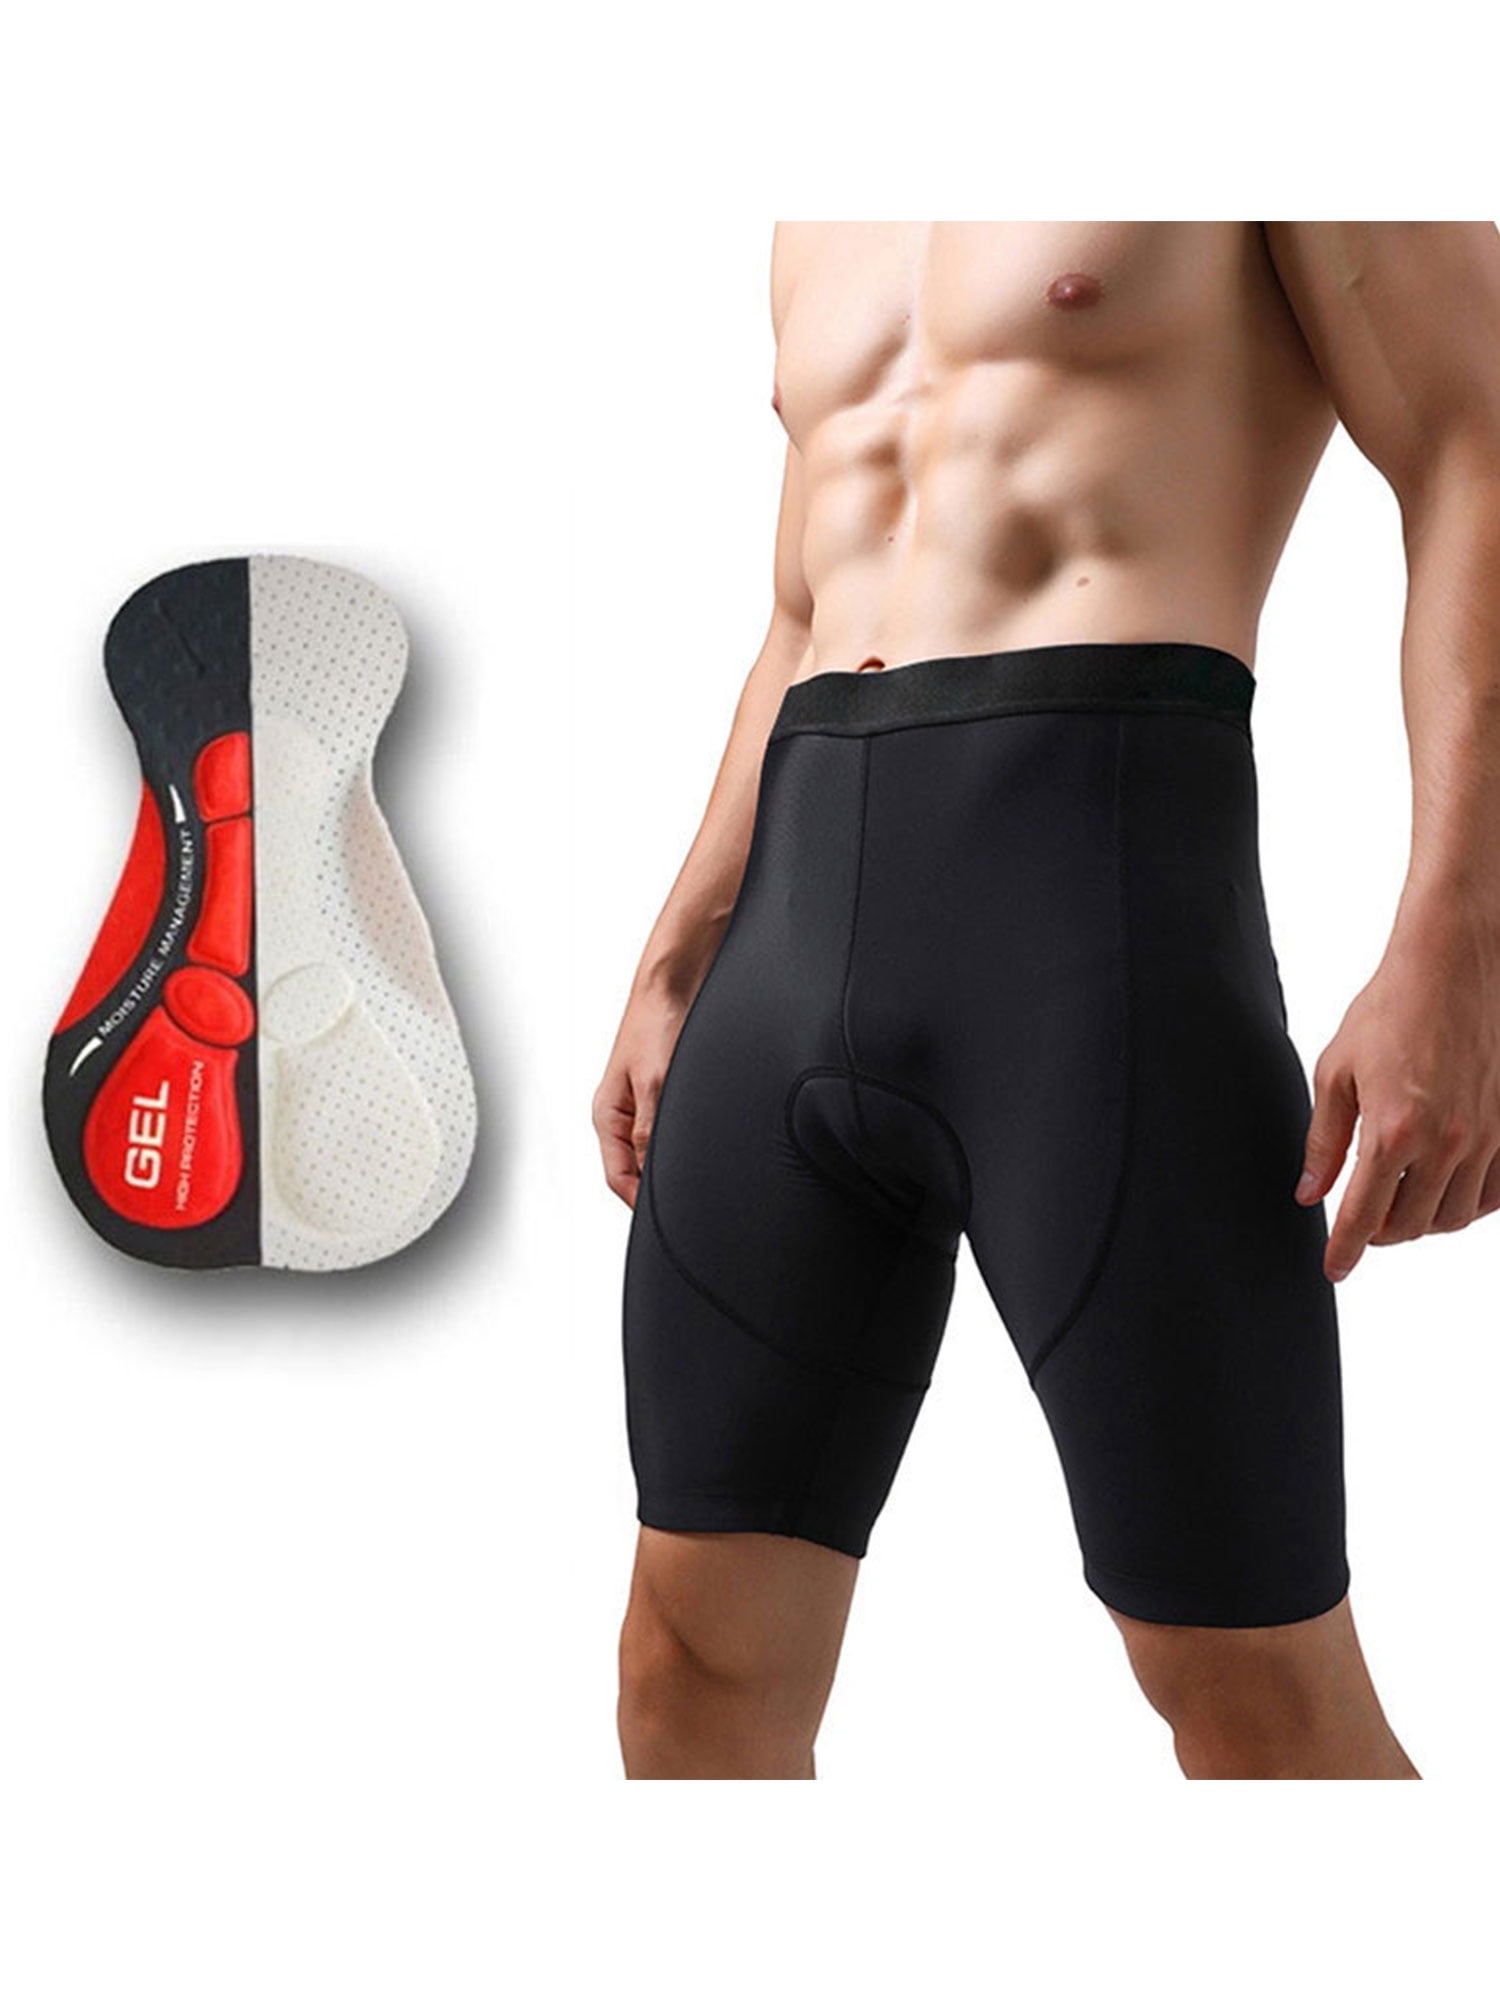 Men's Cycling Shorts Quick dry 3D Gel Padded Cushion  Bike Bicycle Underwear* 